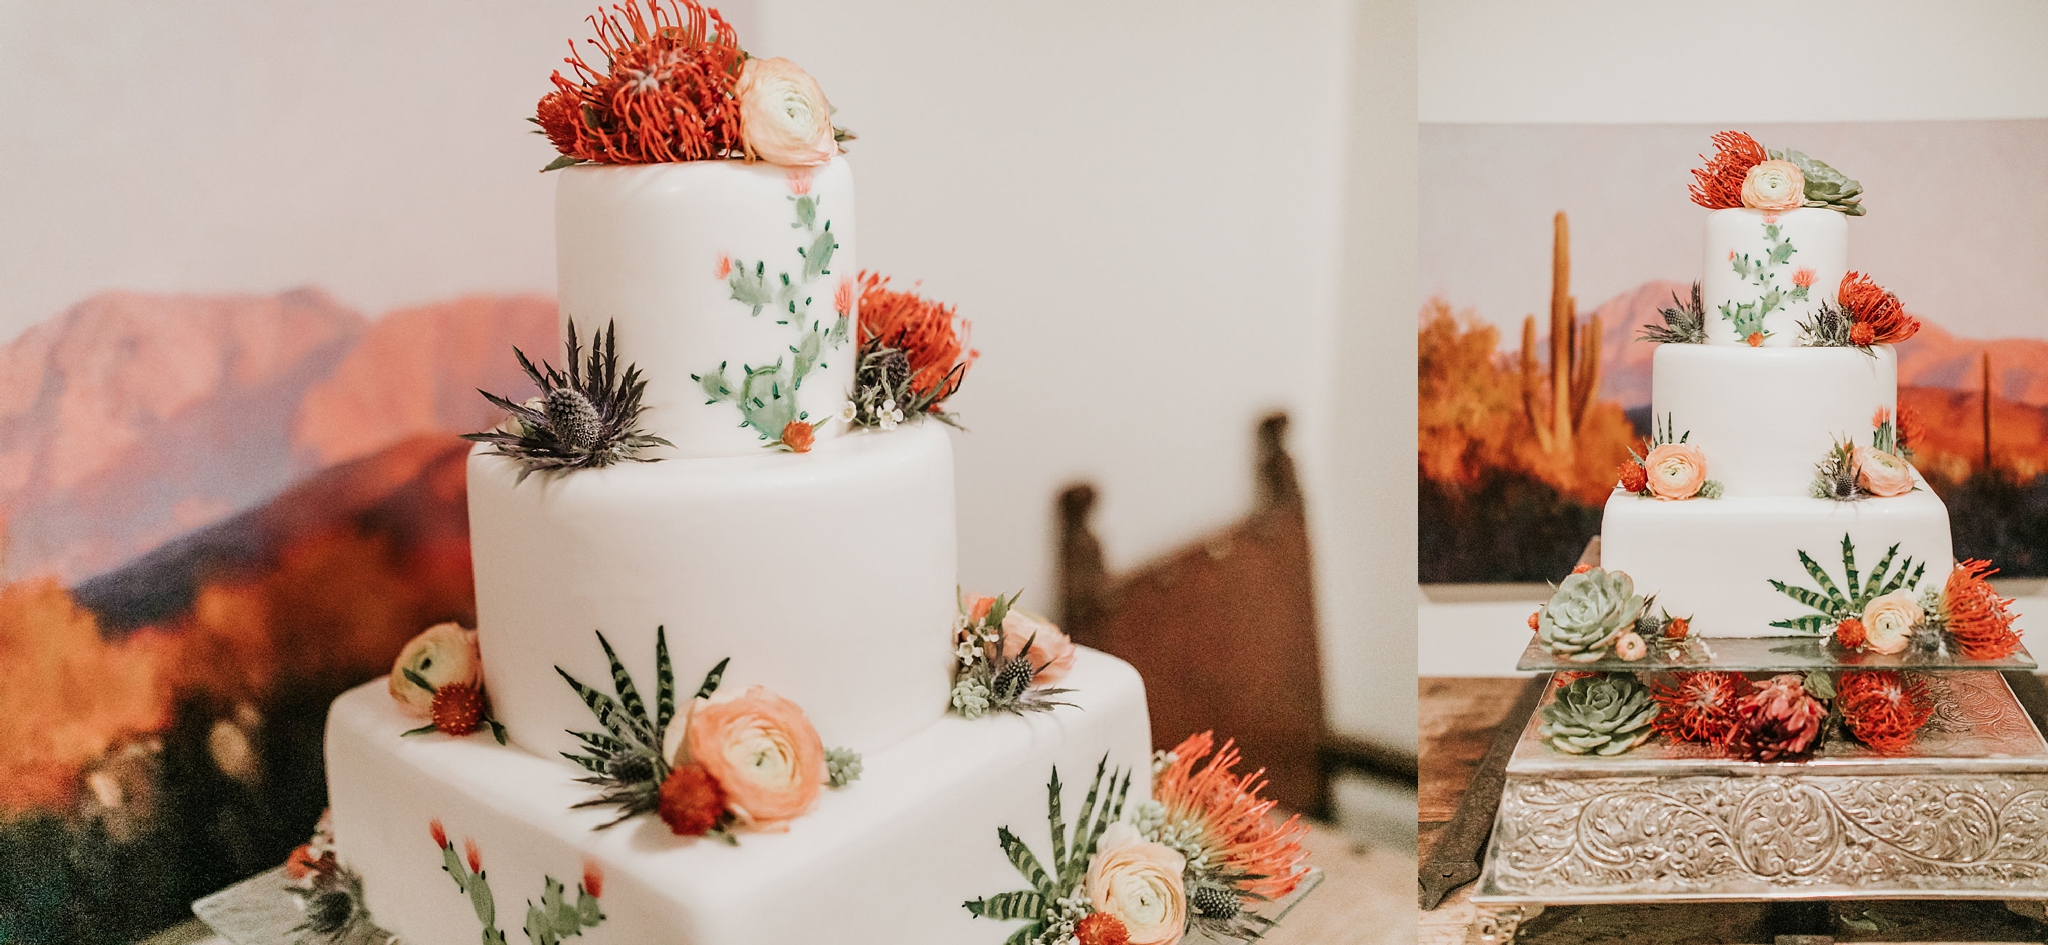 Maggie Austin Cakes In The News! - from Hello to Hitched